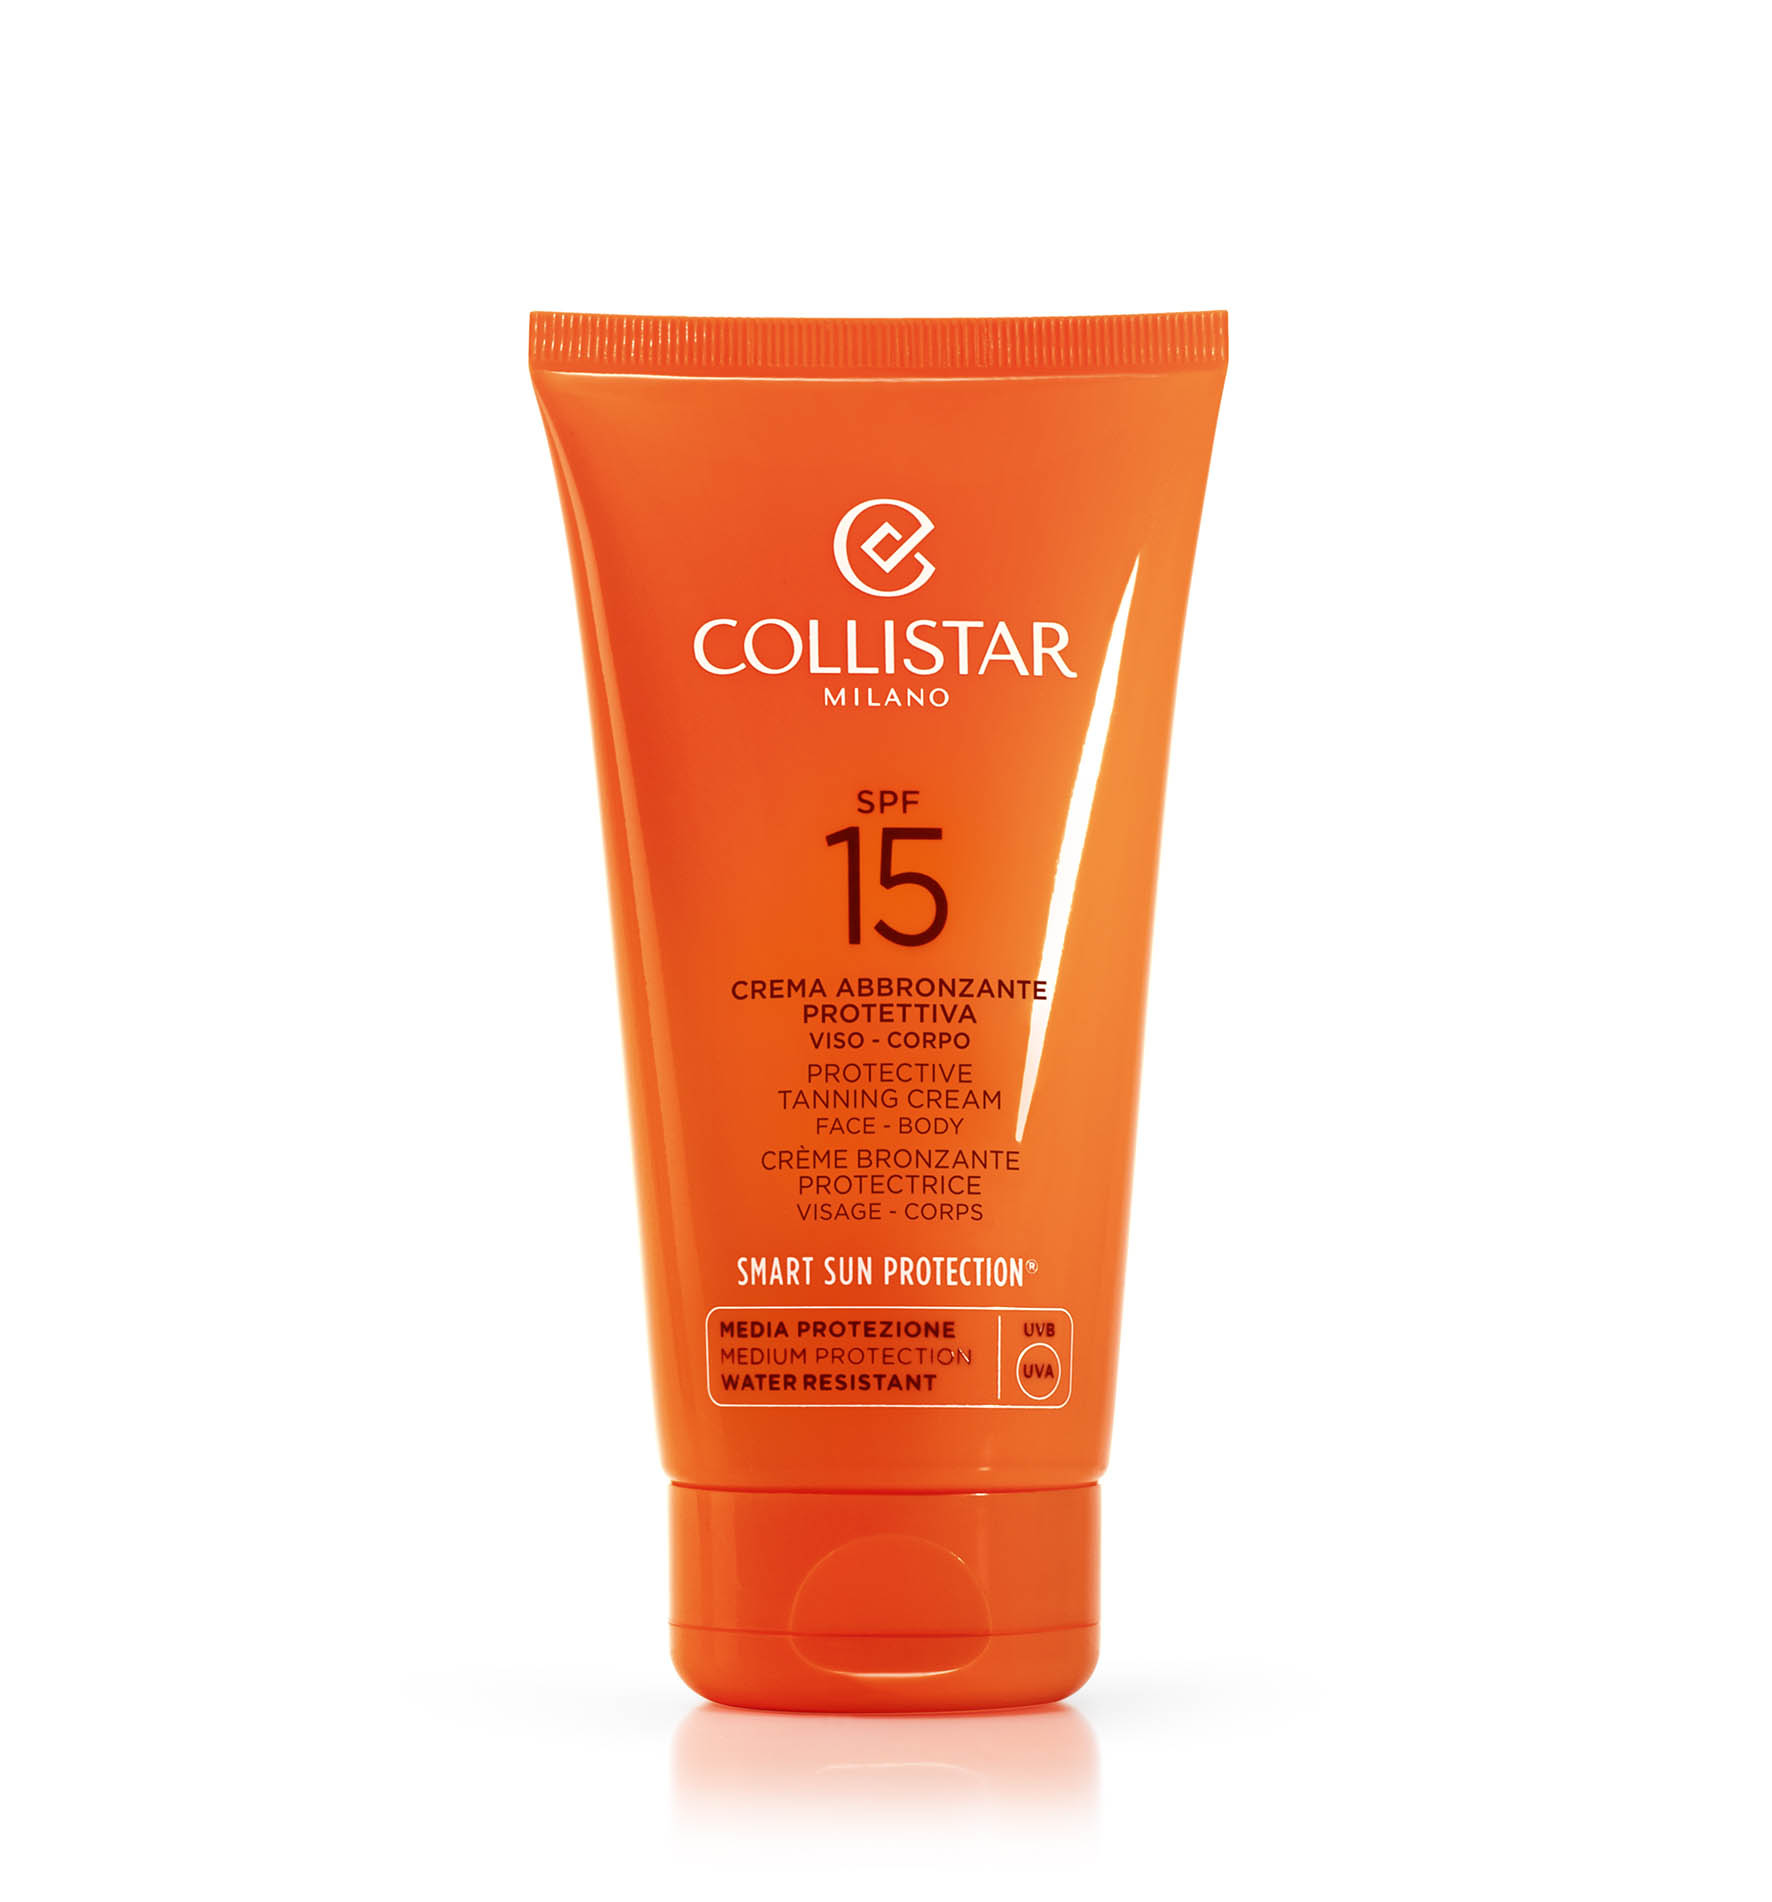 CREME BRONZANTE PROTECTRICE SPF 15 - Moyenne Protection SPF 15-20 | Collistar - Shop Online Ufficiale